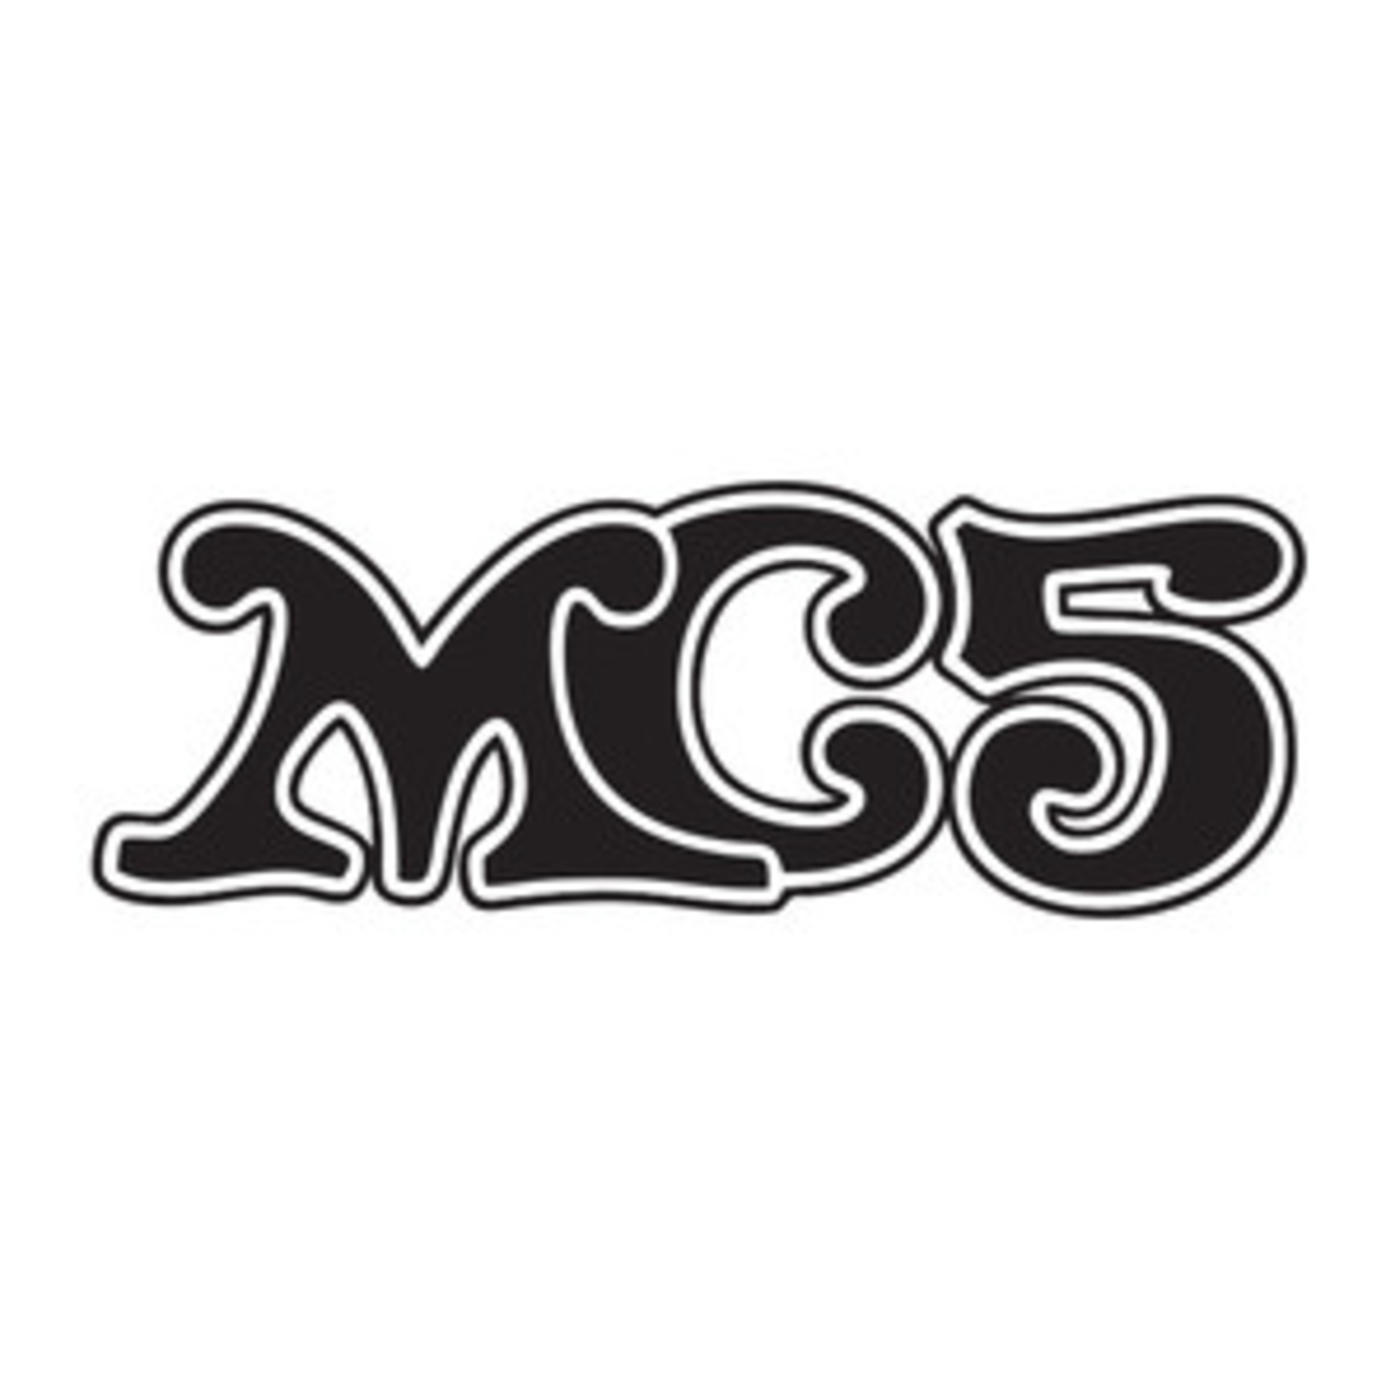 Official MC5 playlist - Kick Out The Jams, Looking At You, The American Ruse, Let Me Try, Tonight